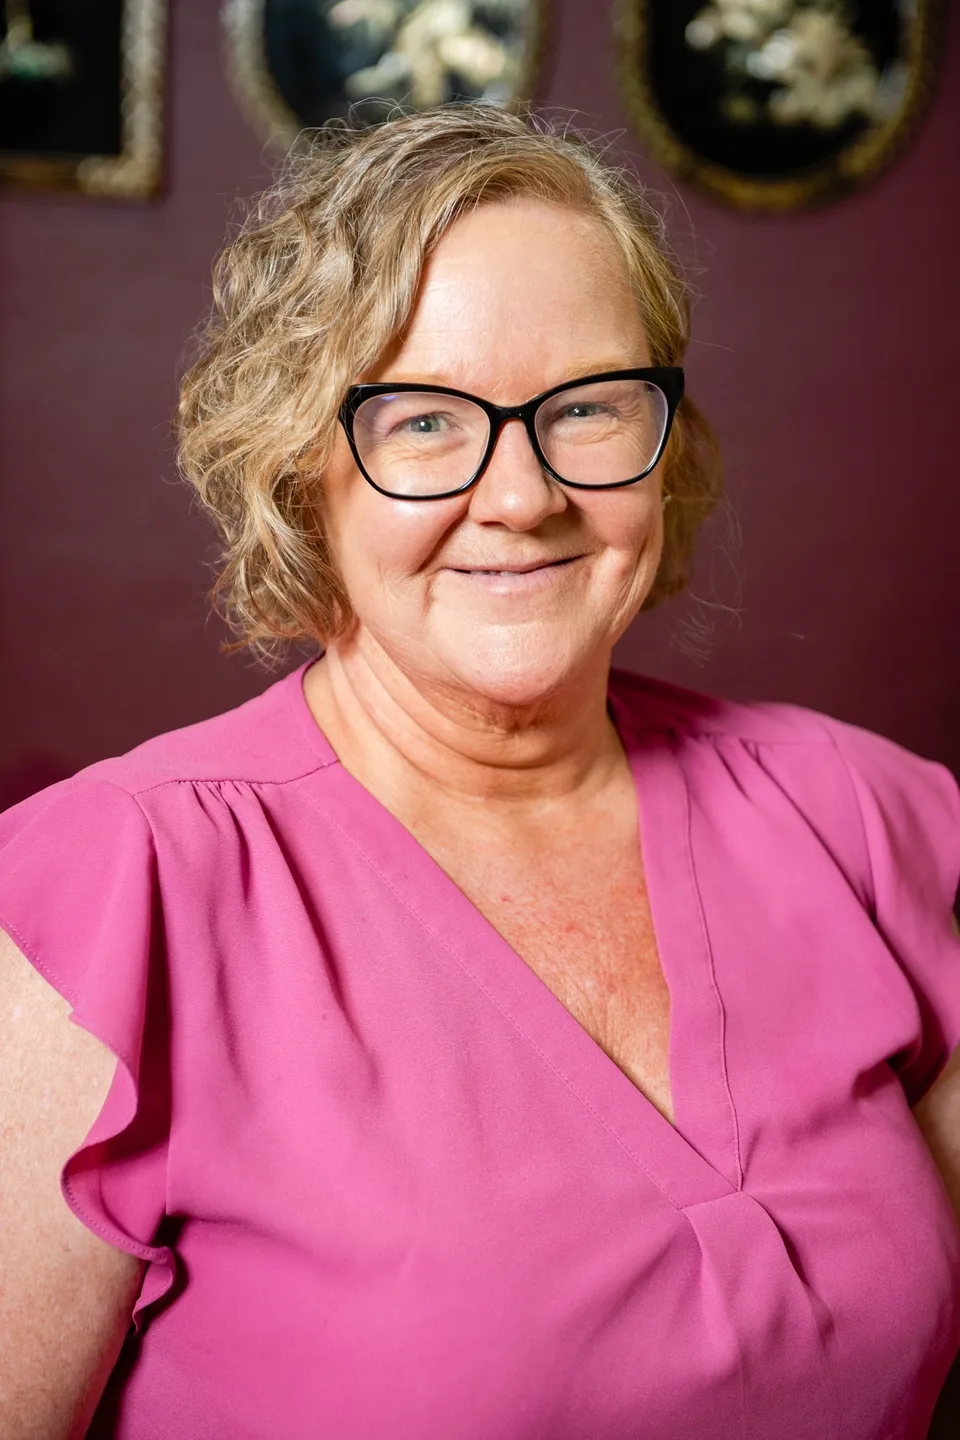 A woman in pink shirt and glasses smiling for the camera.